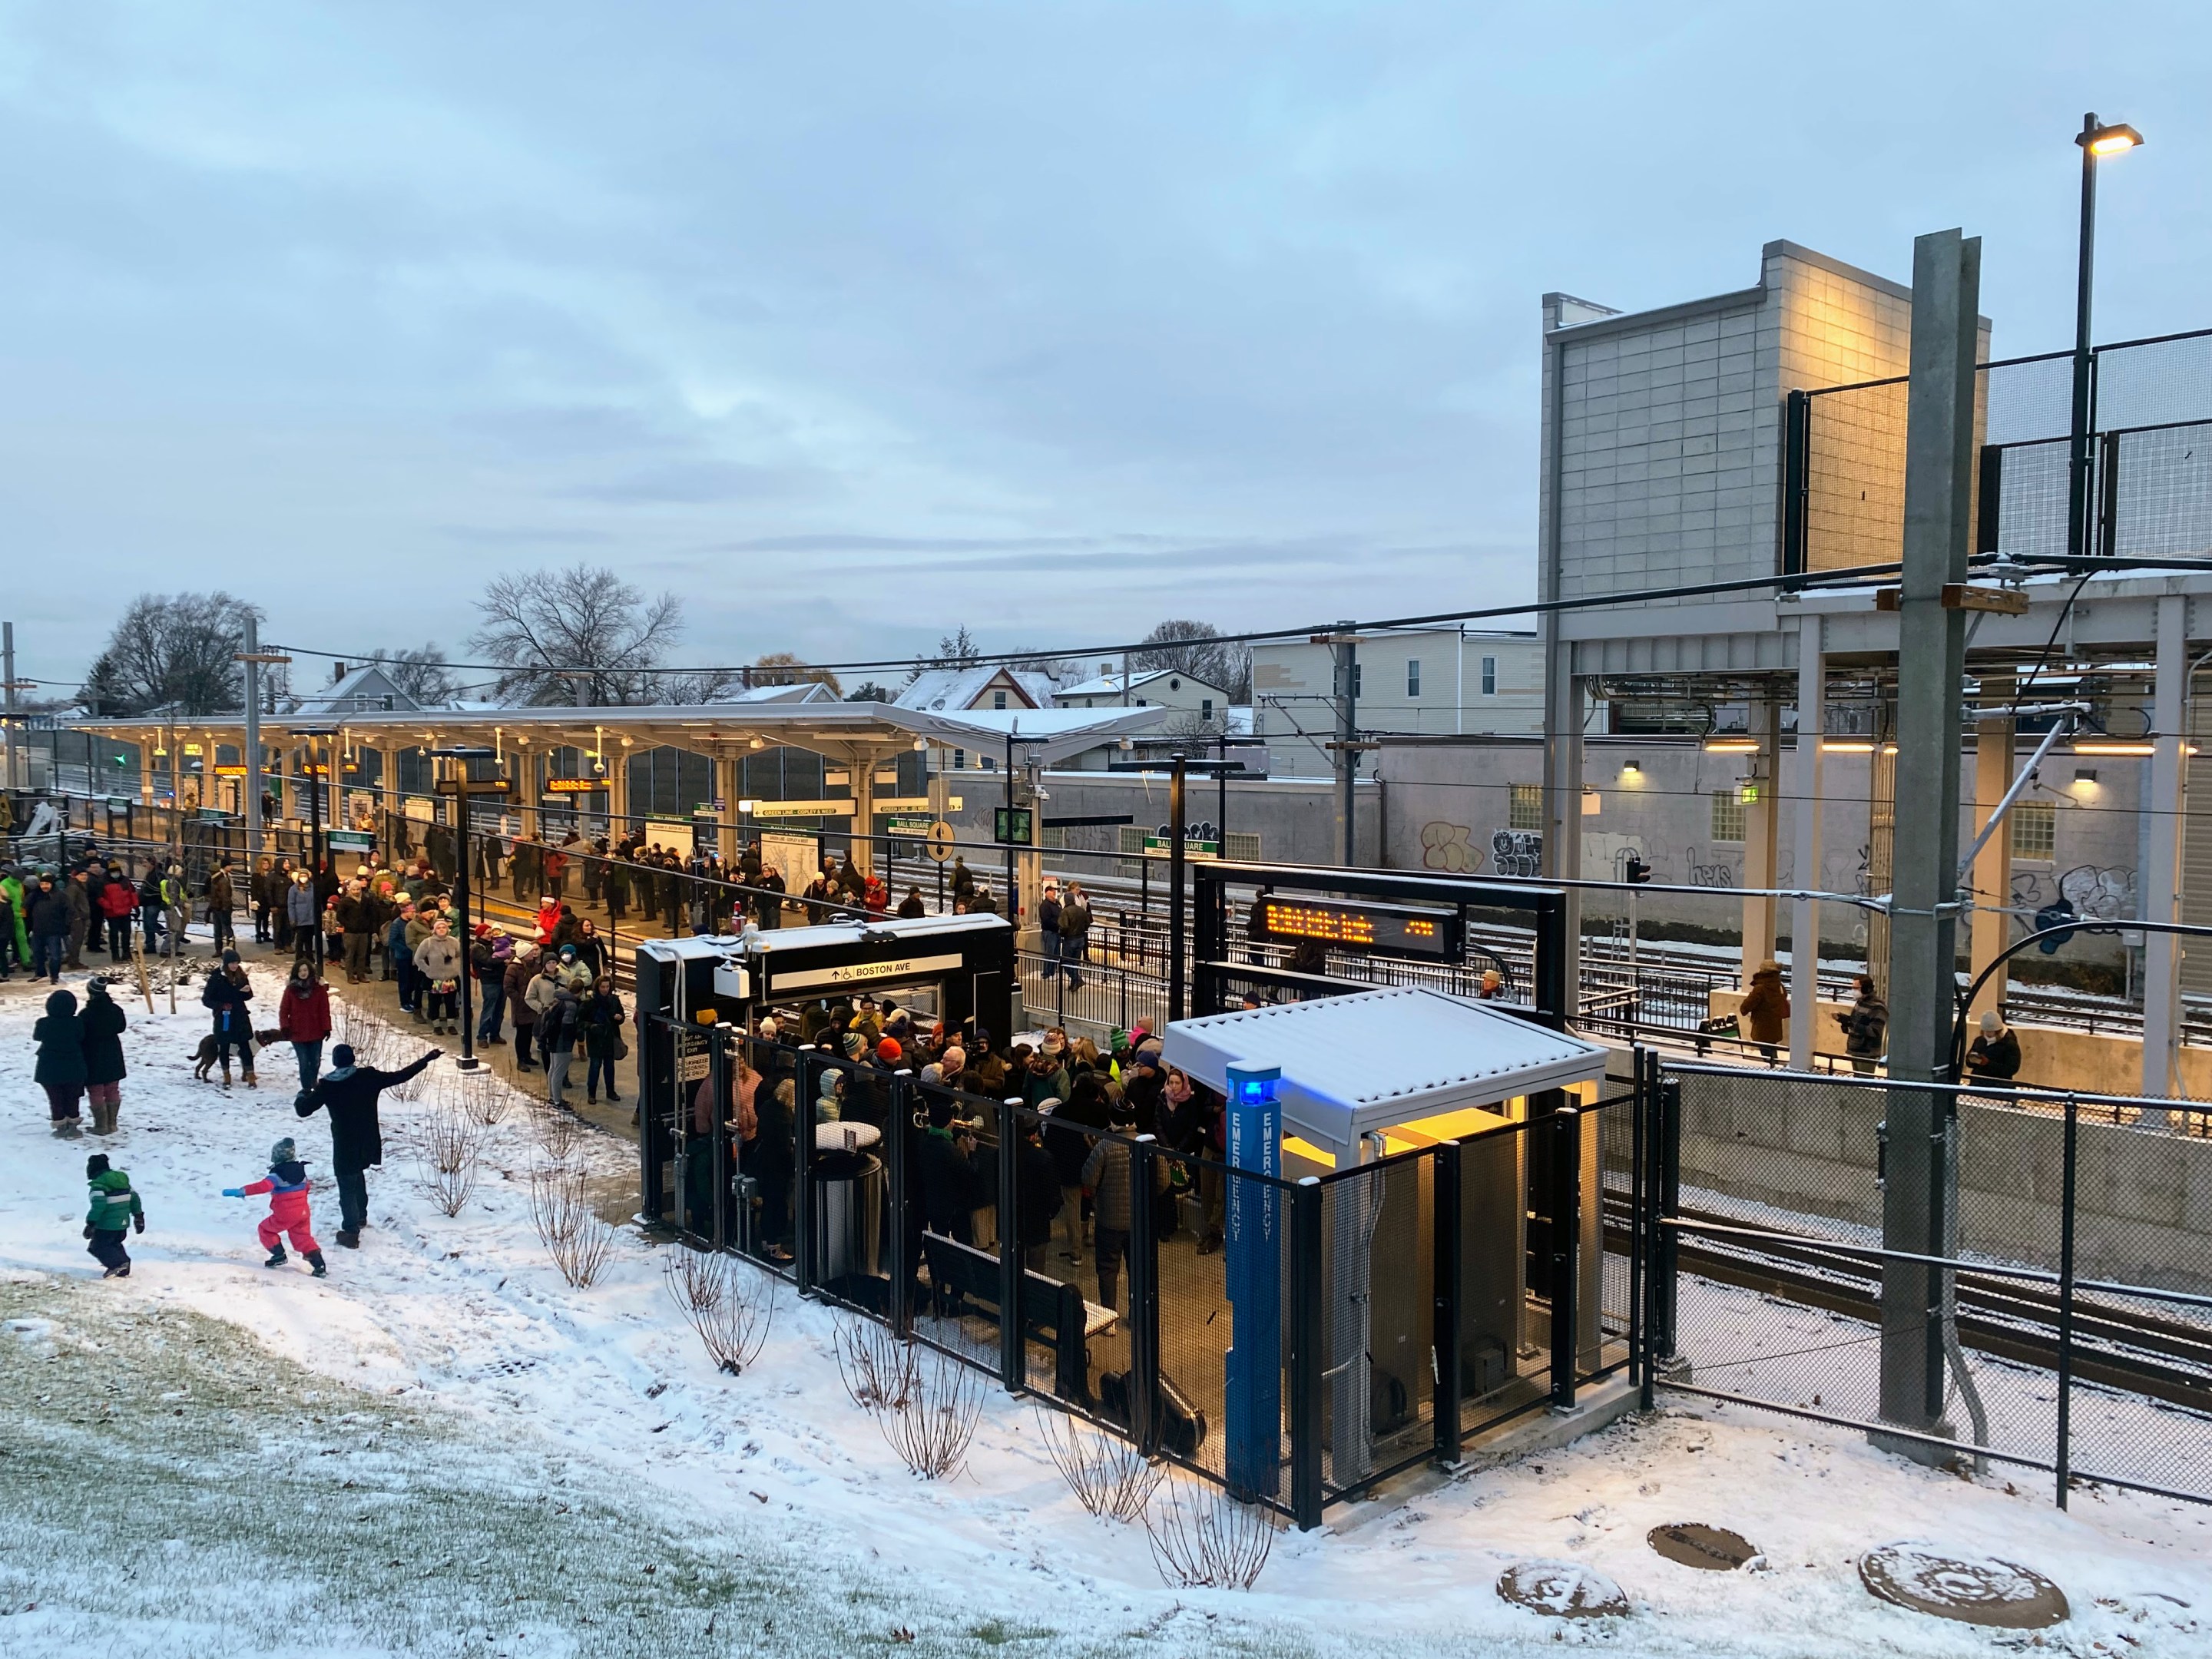 A large crowd of people celebrate the Green Line extension's opening day outside a snowy Ball Square station while some kids play on a snowy hillside next to the station entrance.